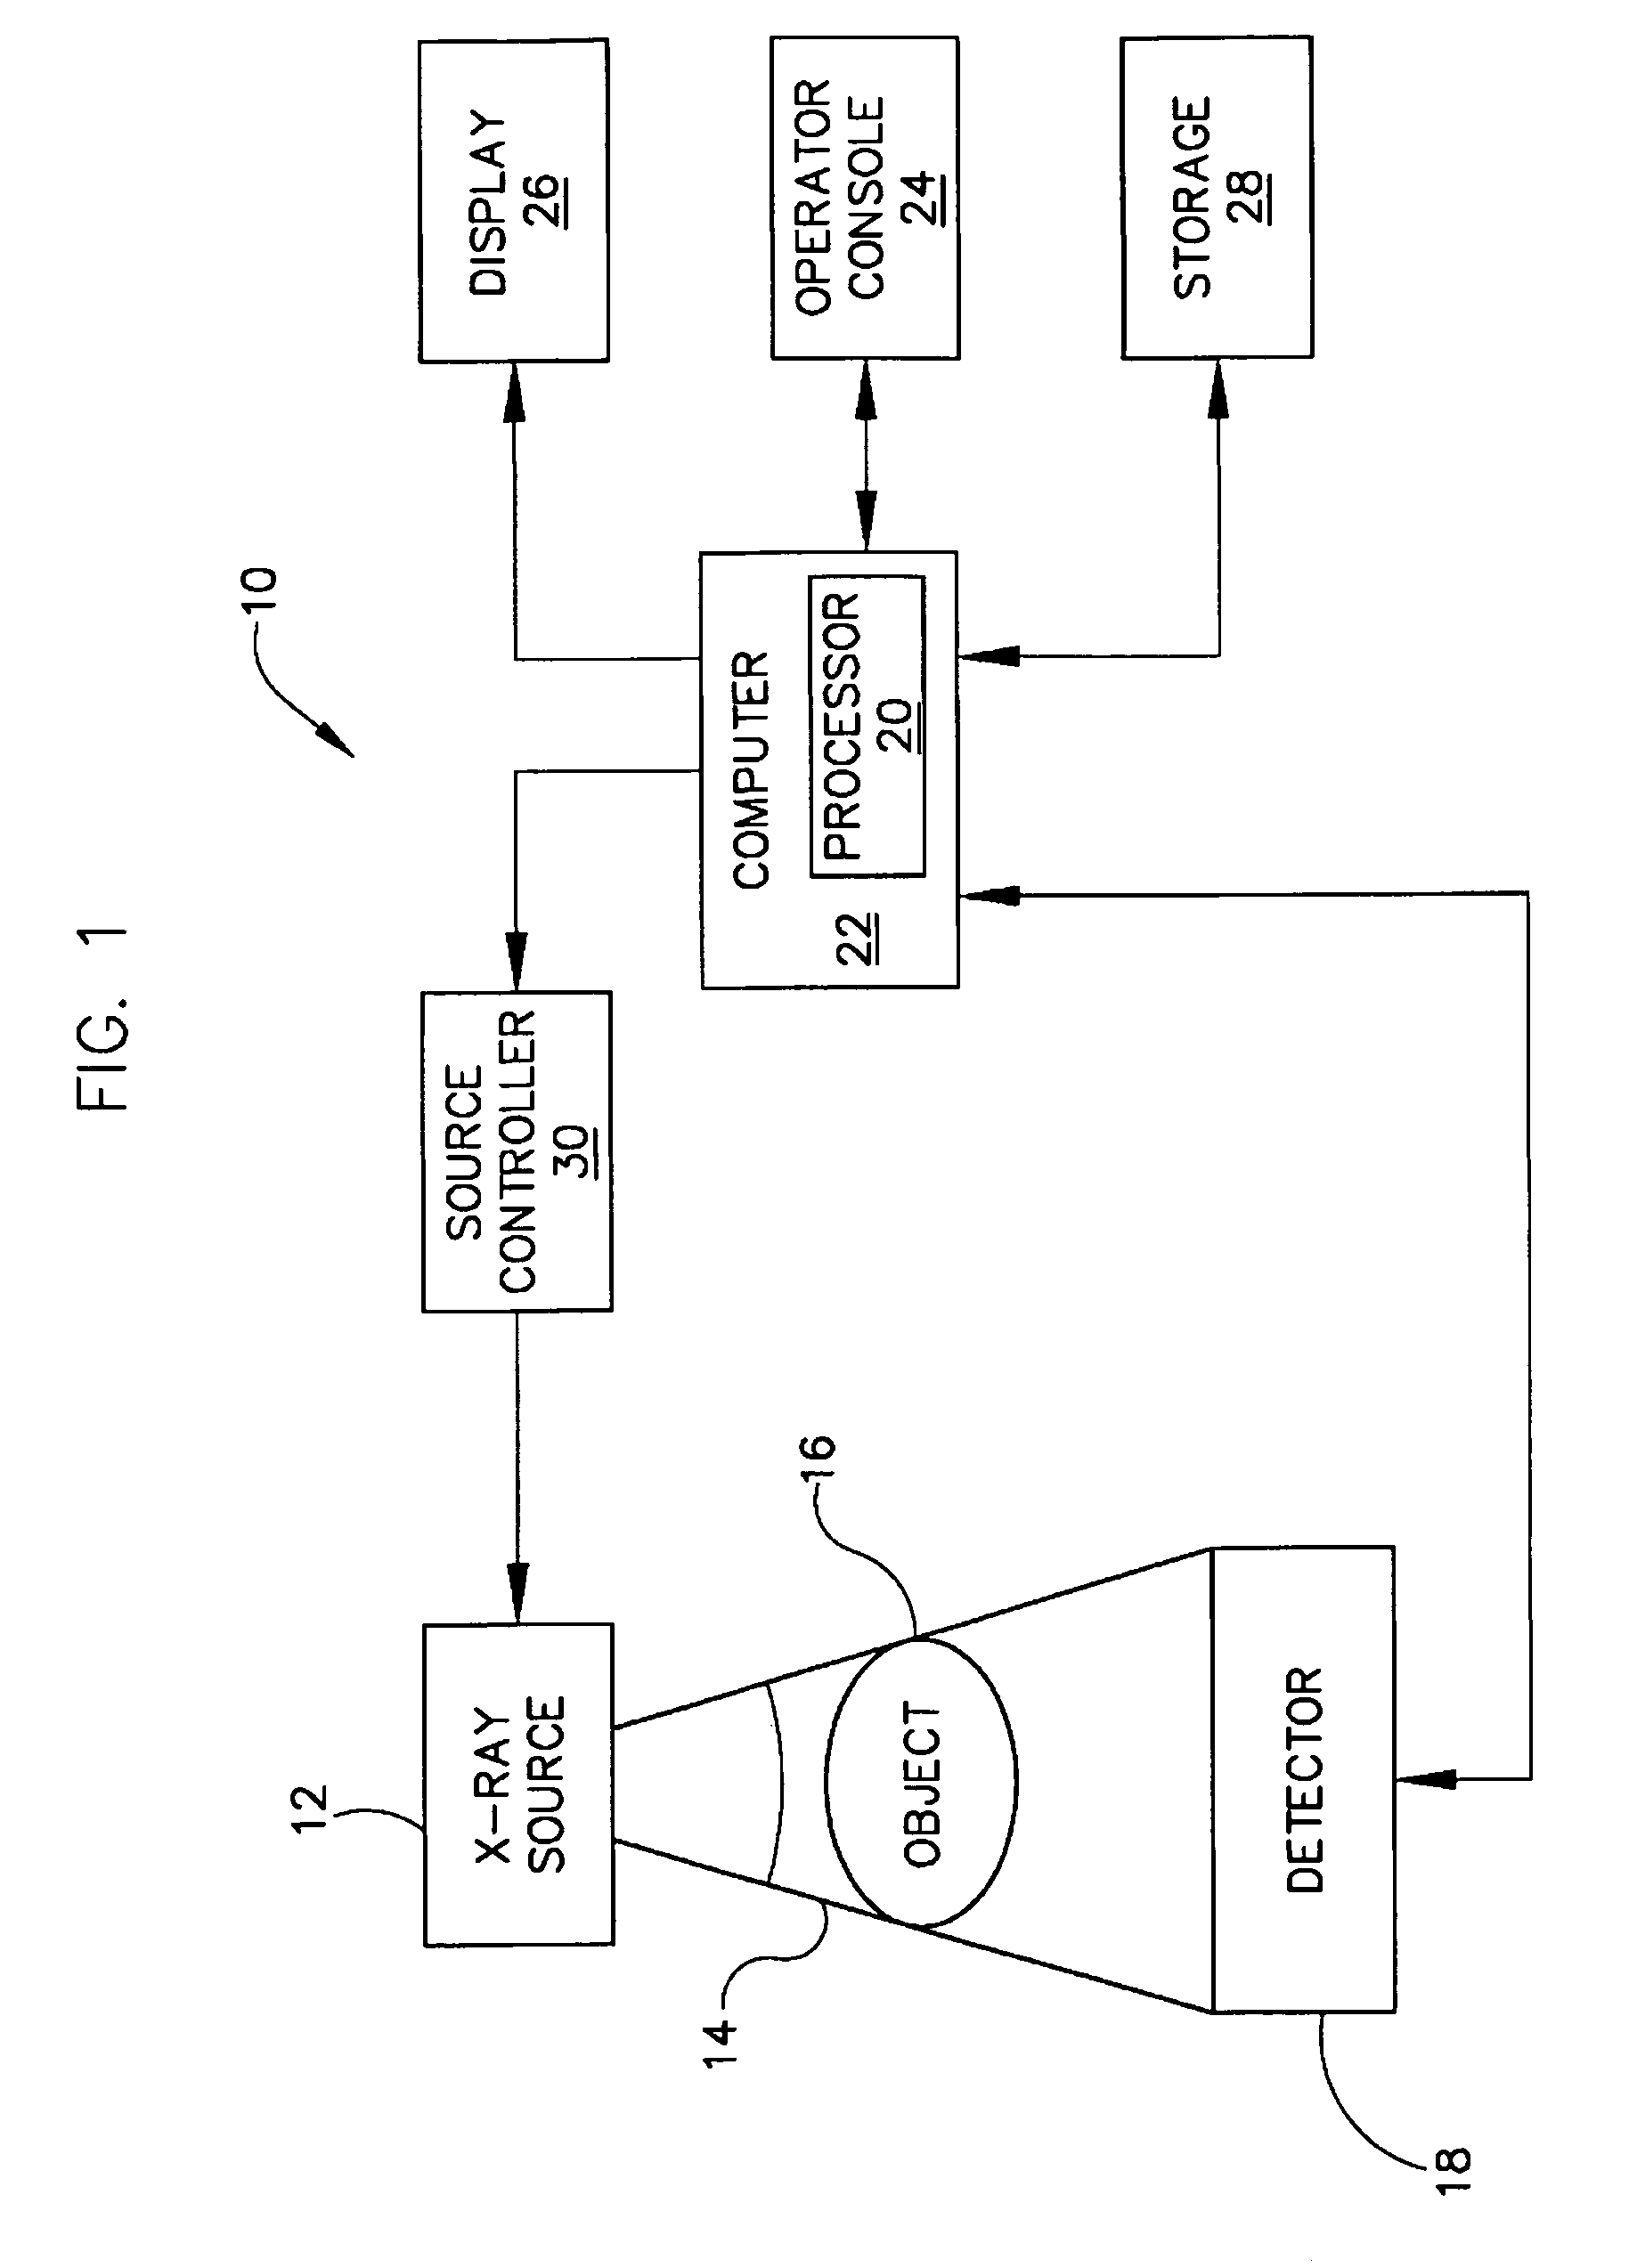 System and method to maintain target material in ductile state